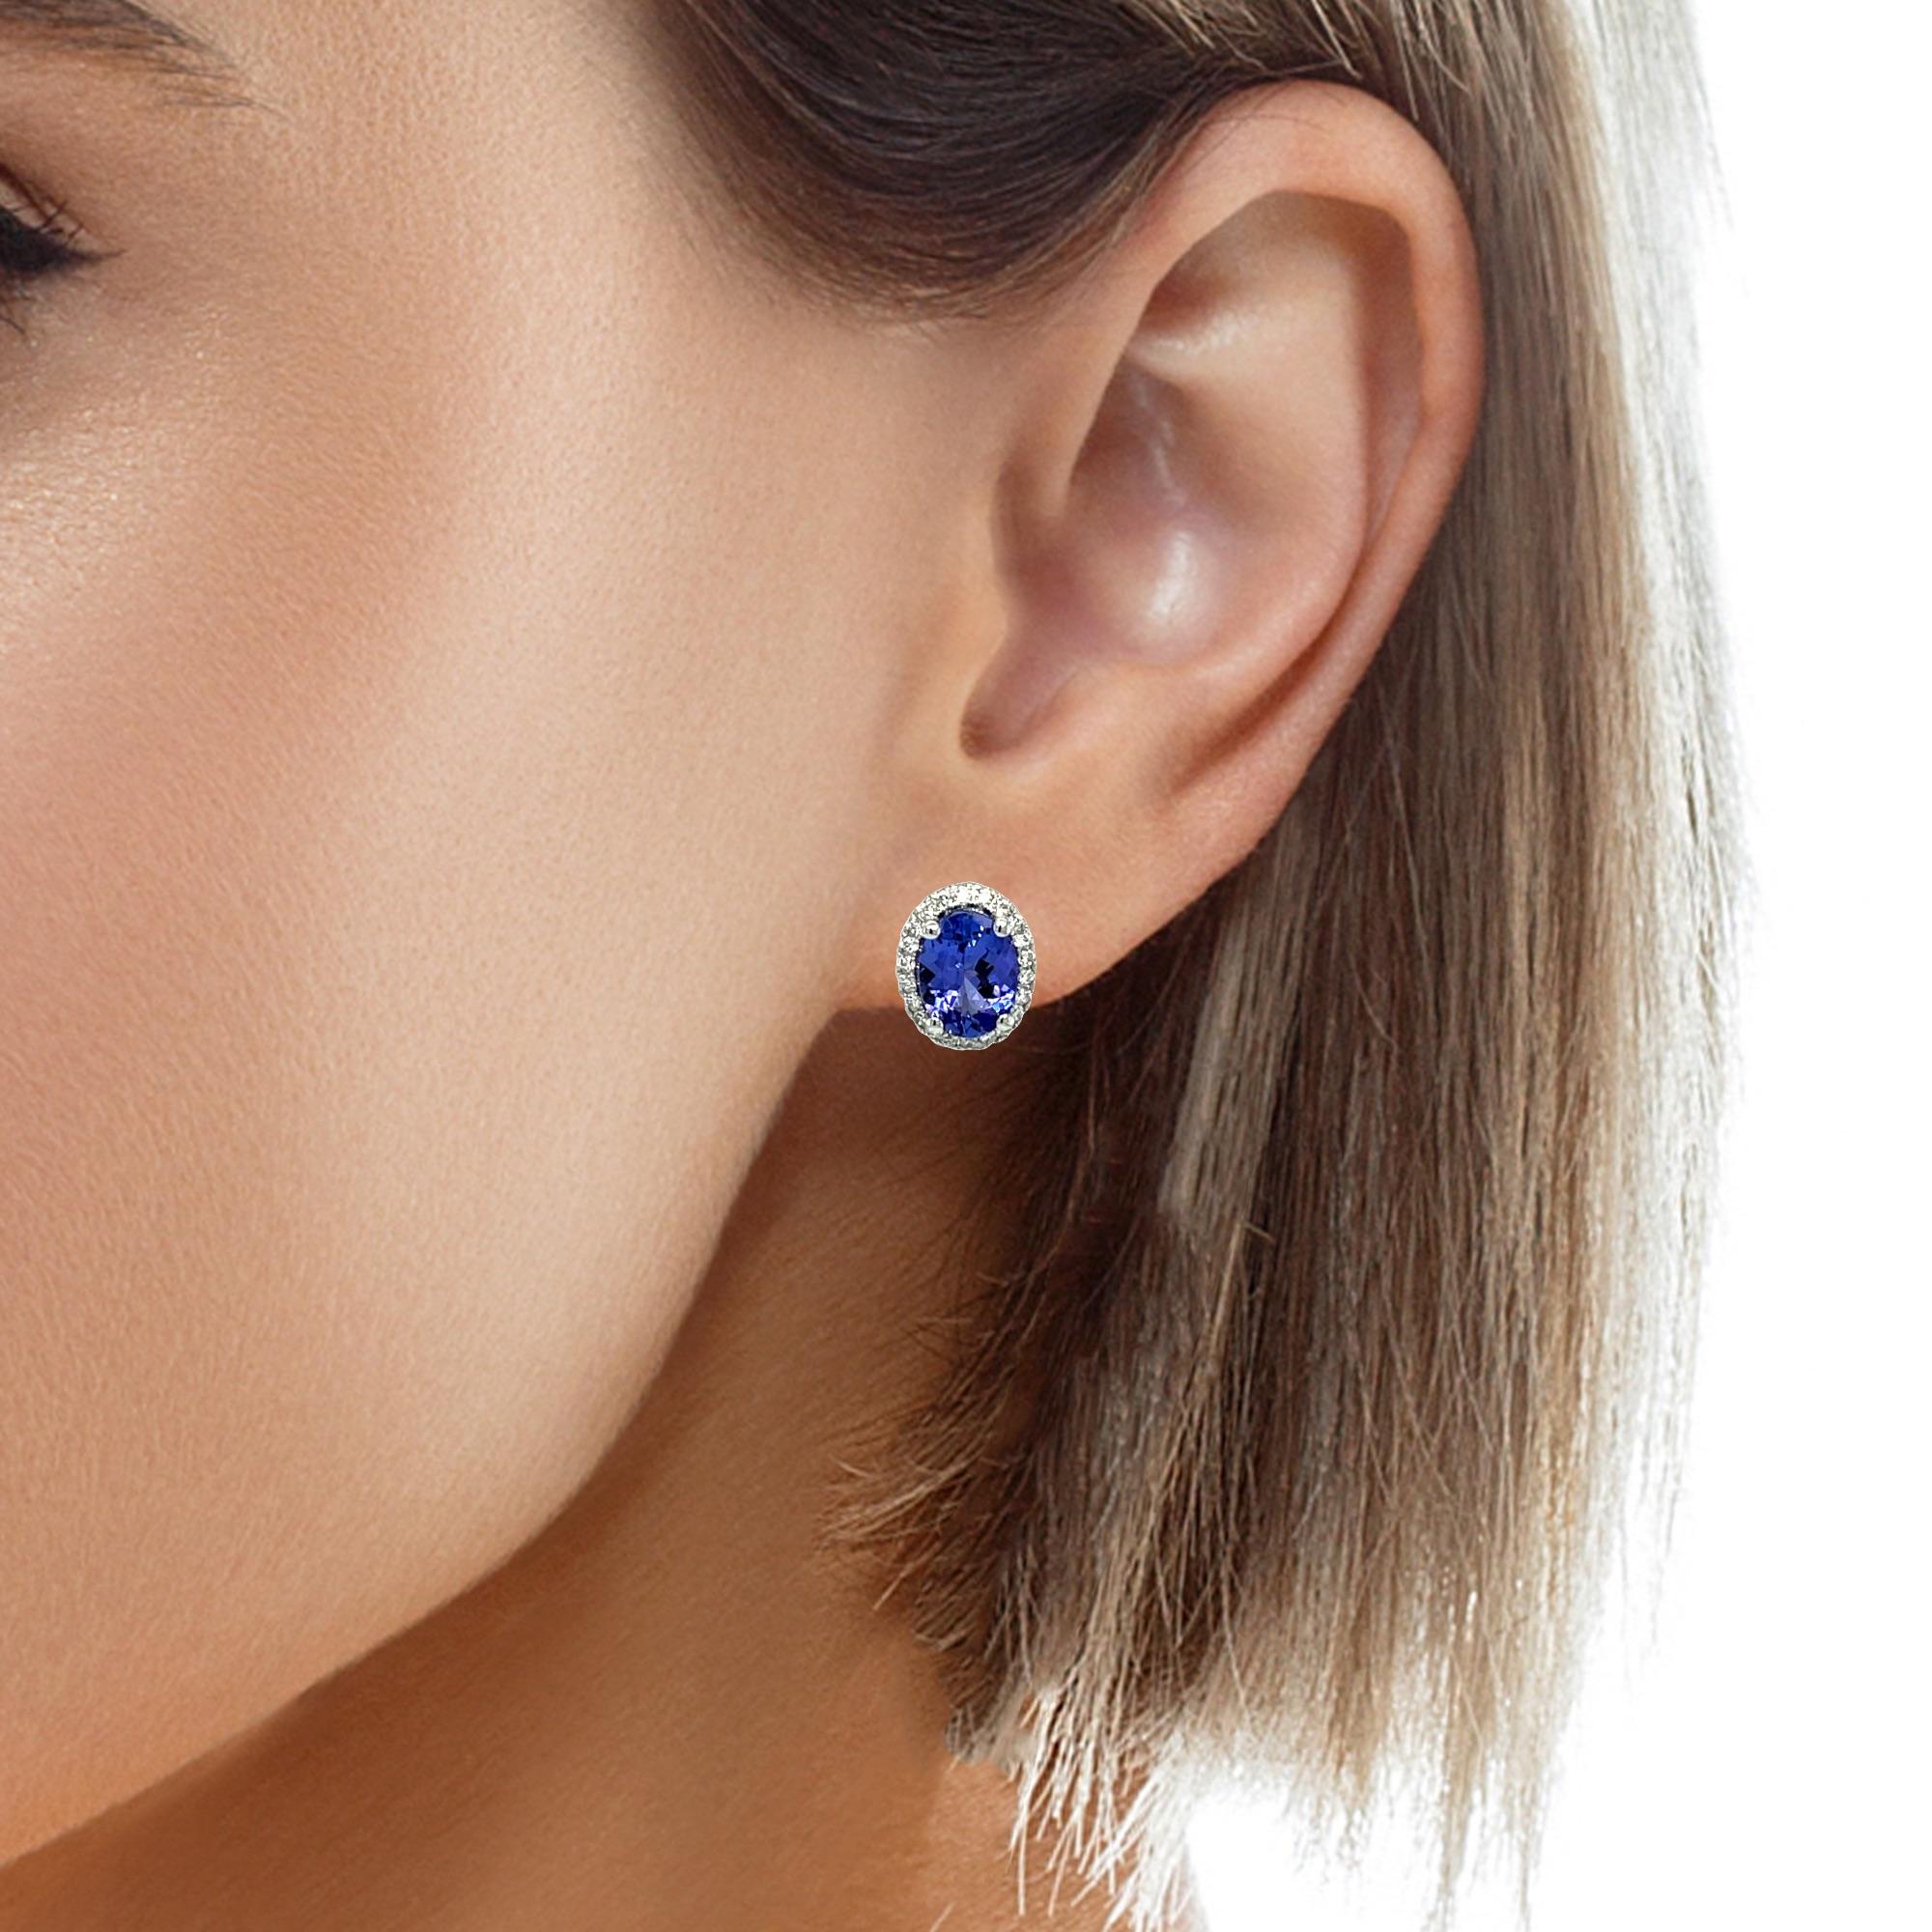 These stunning AAA quality oval Tanzanite and Diamond stud earrings are surrounded by shimmering diamonds. There is a double push lock for extra security. These earrings come in a beautiful box ready for the perfect gift!

14KW:            2.80